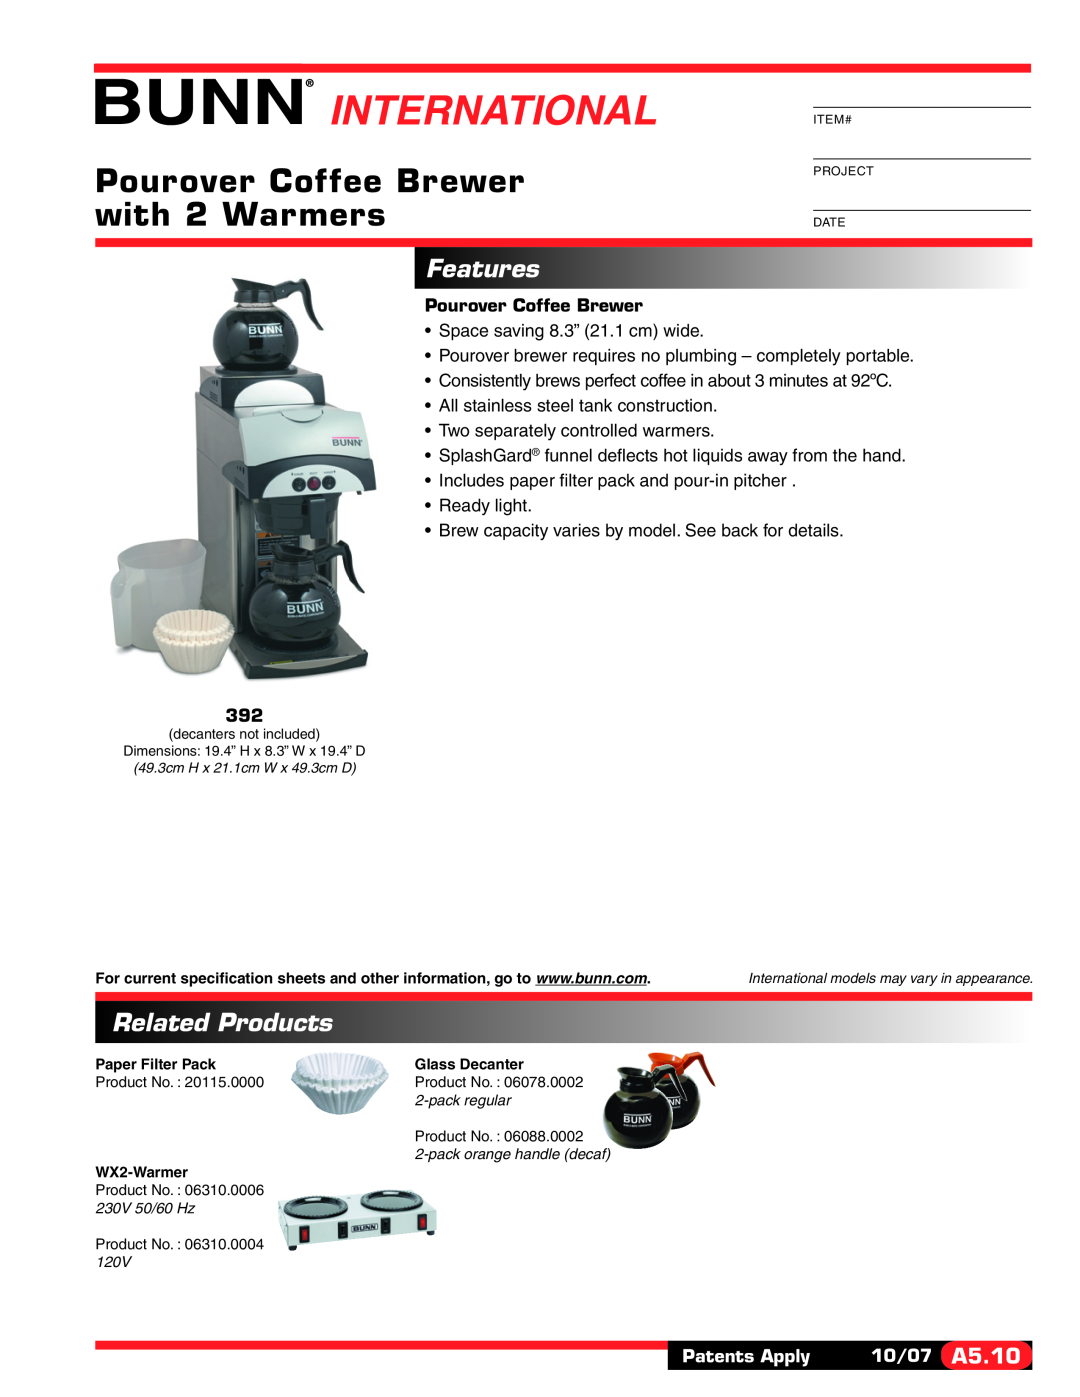 Bunn 392 specifications INTERNATIONAL Item#, Pourover Coffee Brewer with 2 Warmers, Features, Related Products 